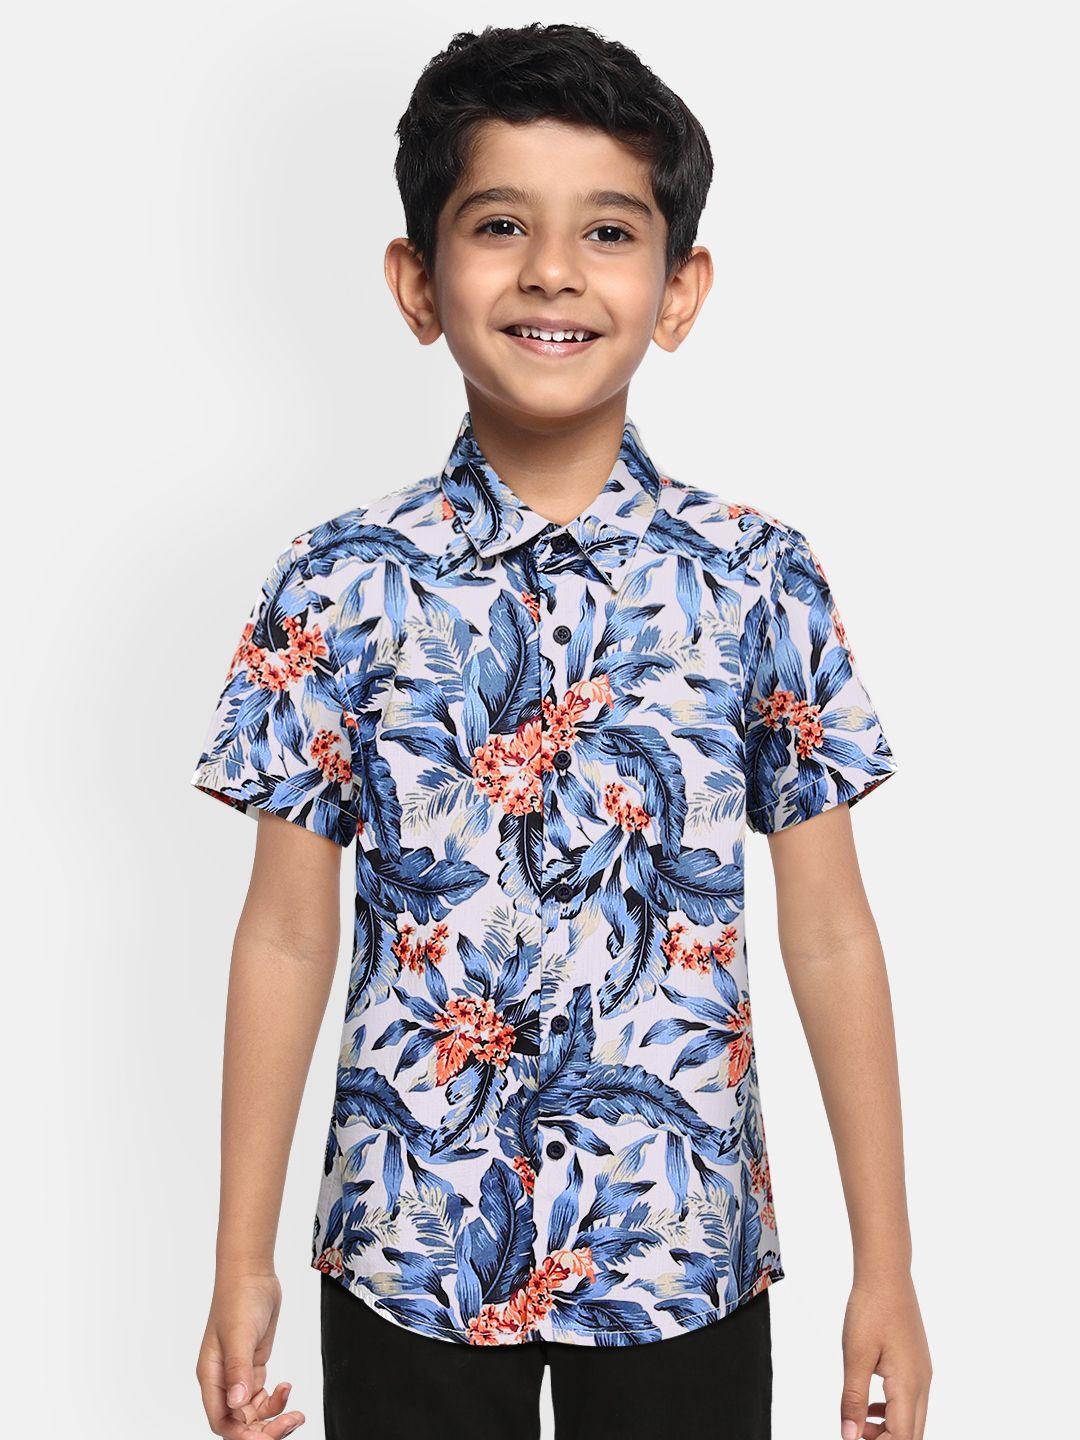 Bene Kleed Boys White Slim Fit N9 Silver Anti-Microbial Cotton Floral Printed Casual Shirt